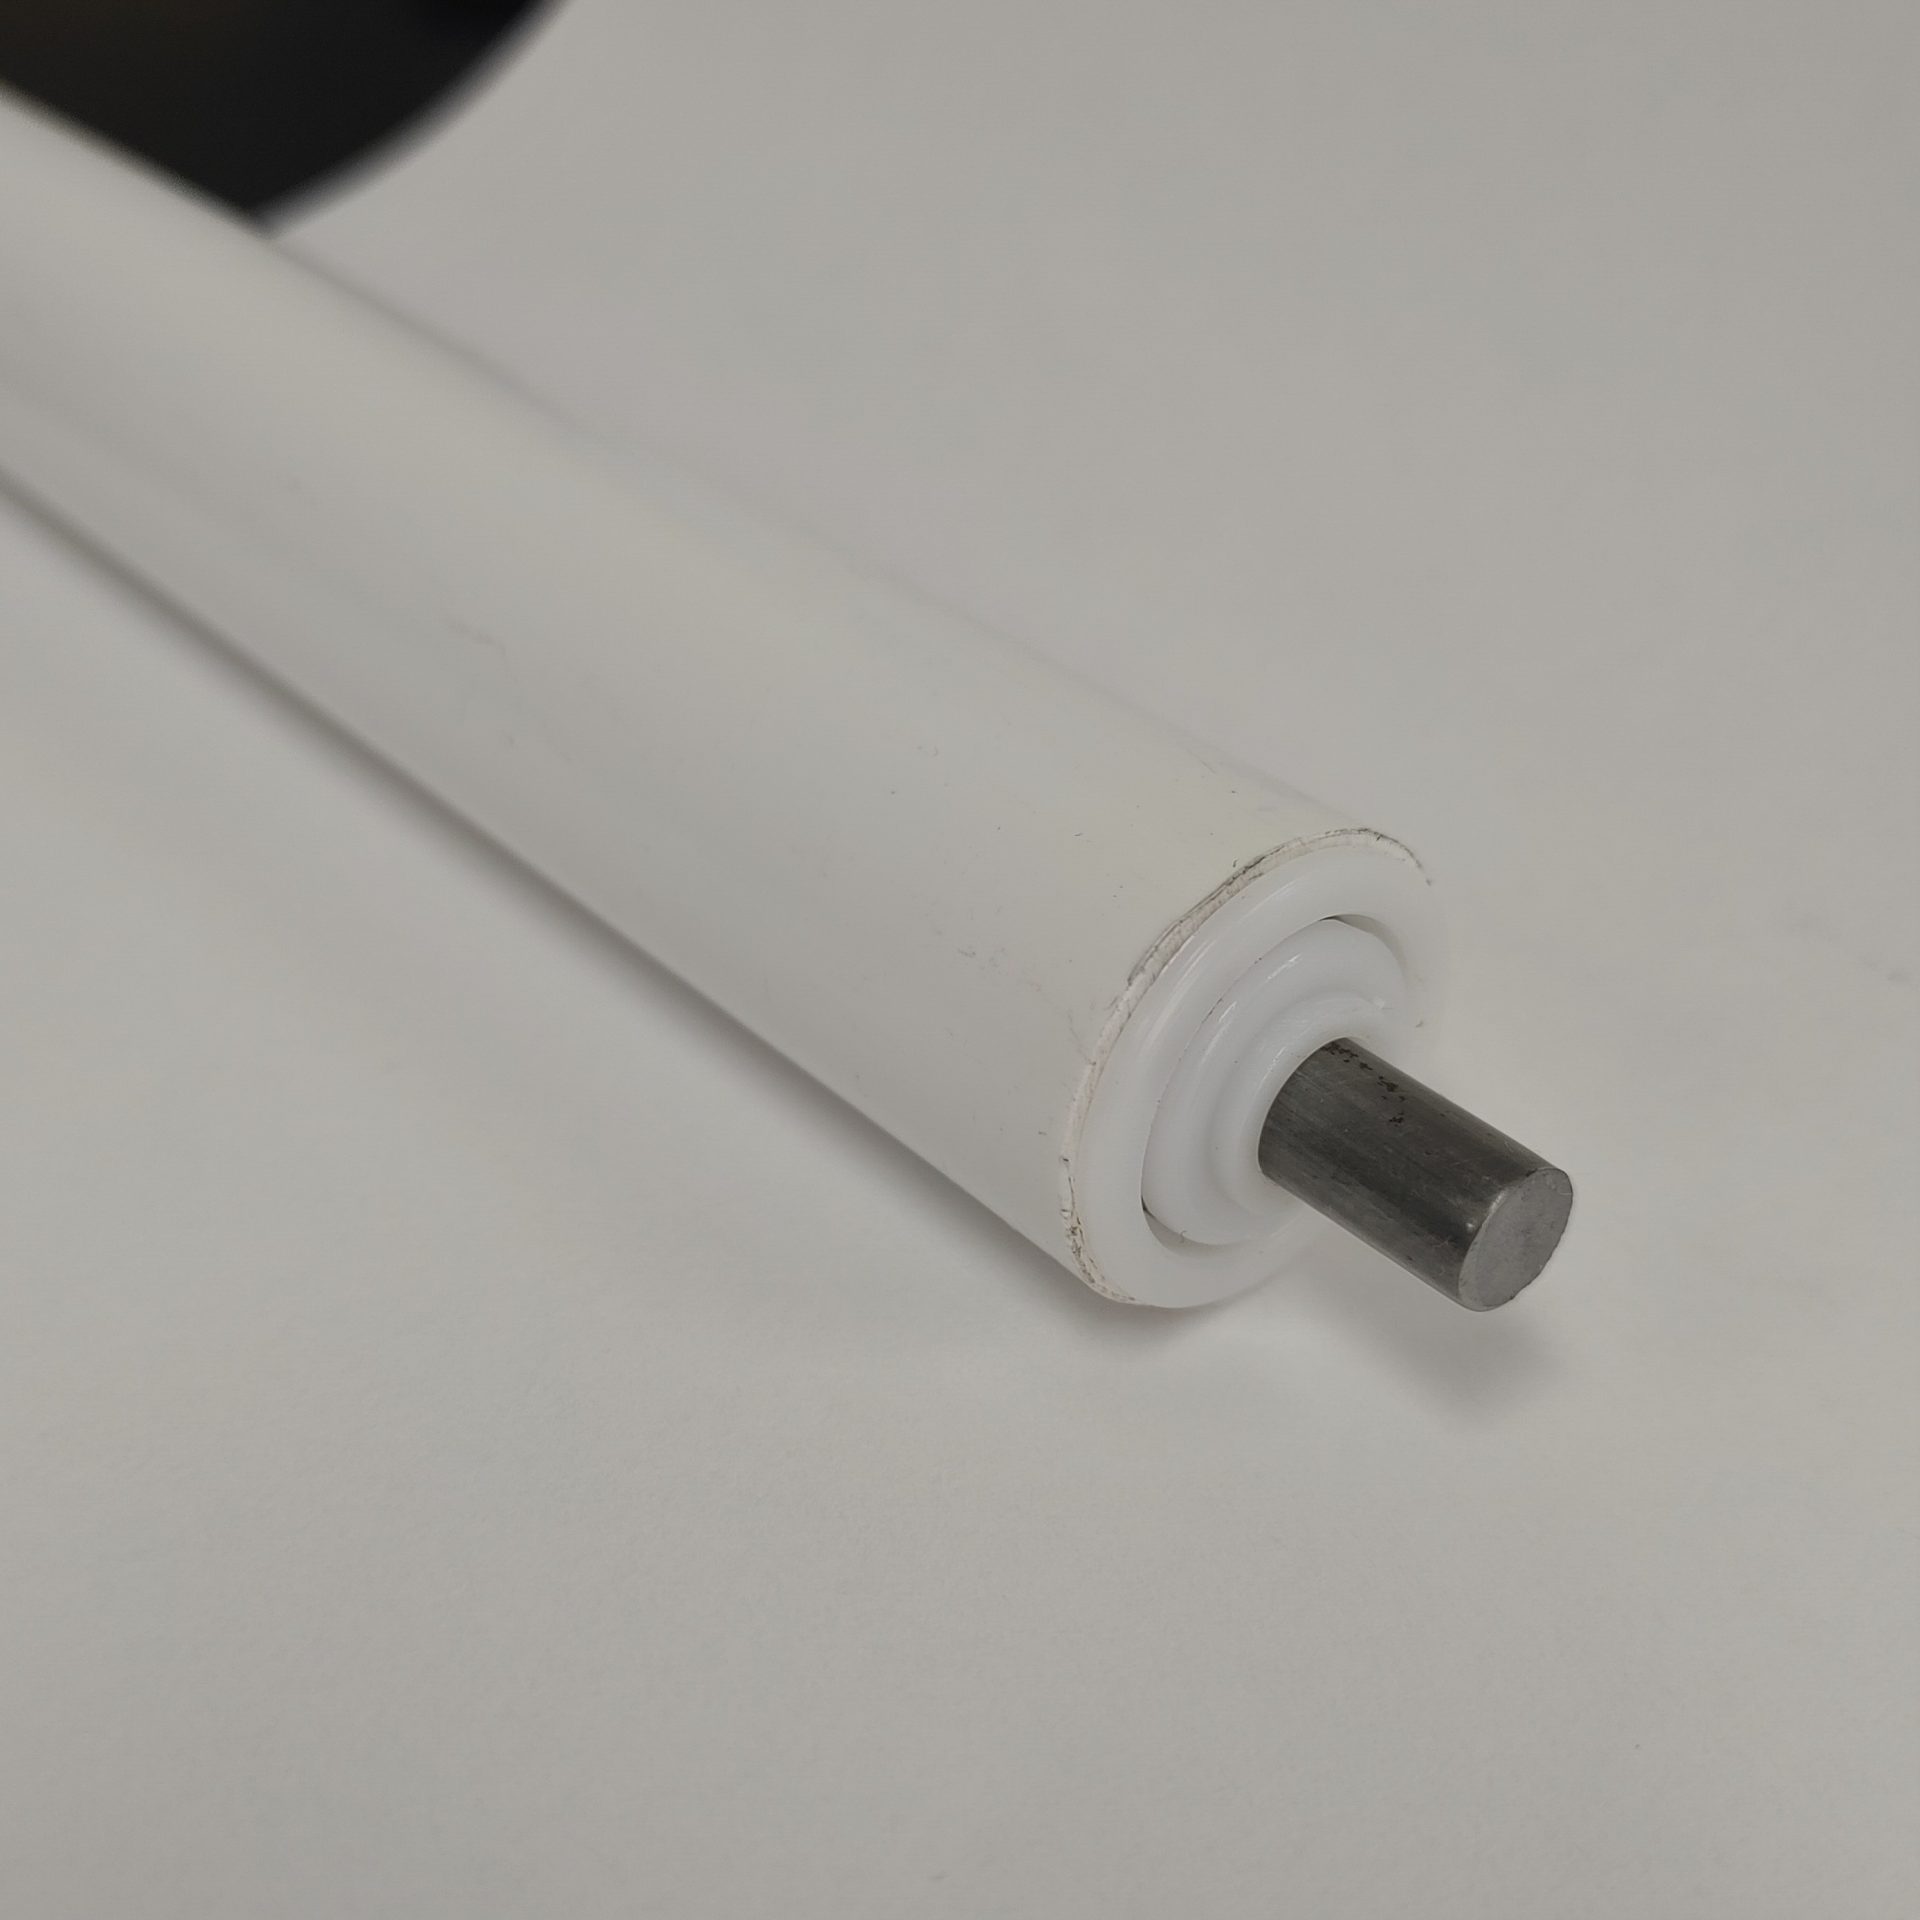 1.05 pvc replacement conveyor roller from Rolcon